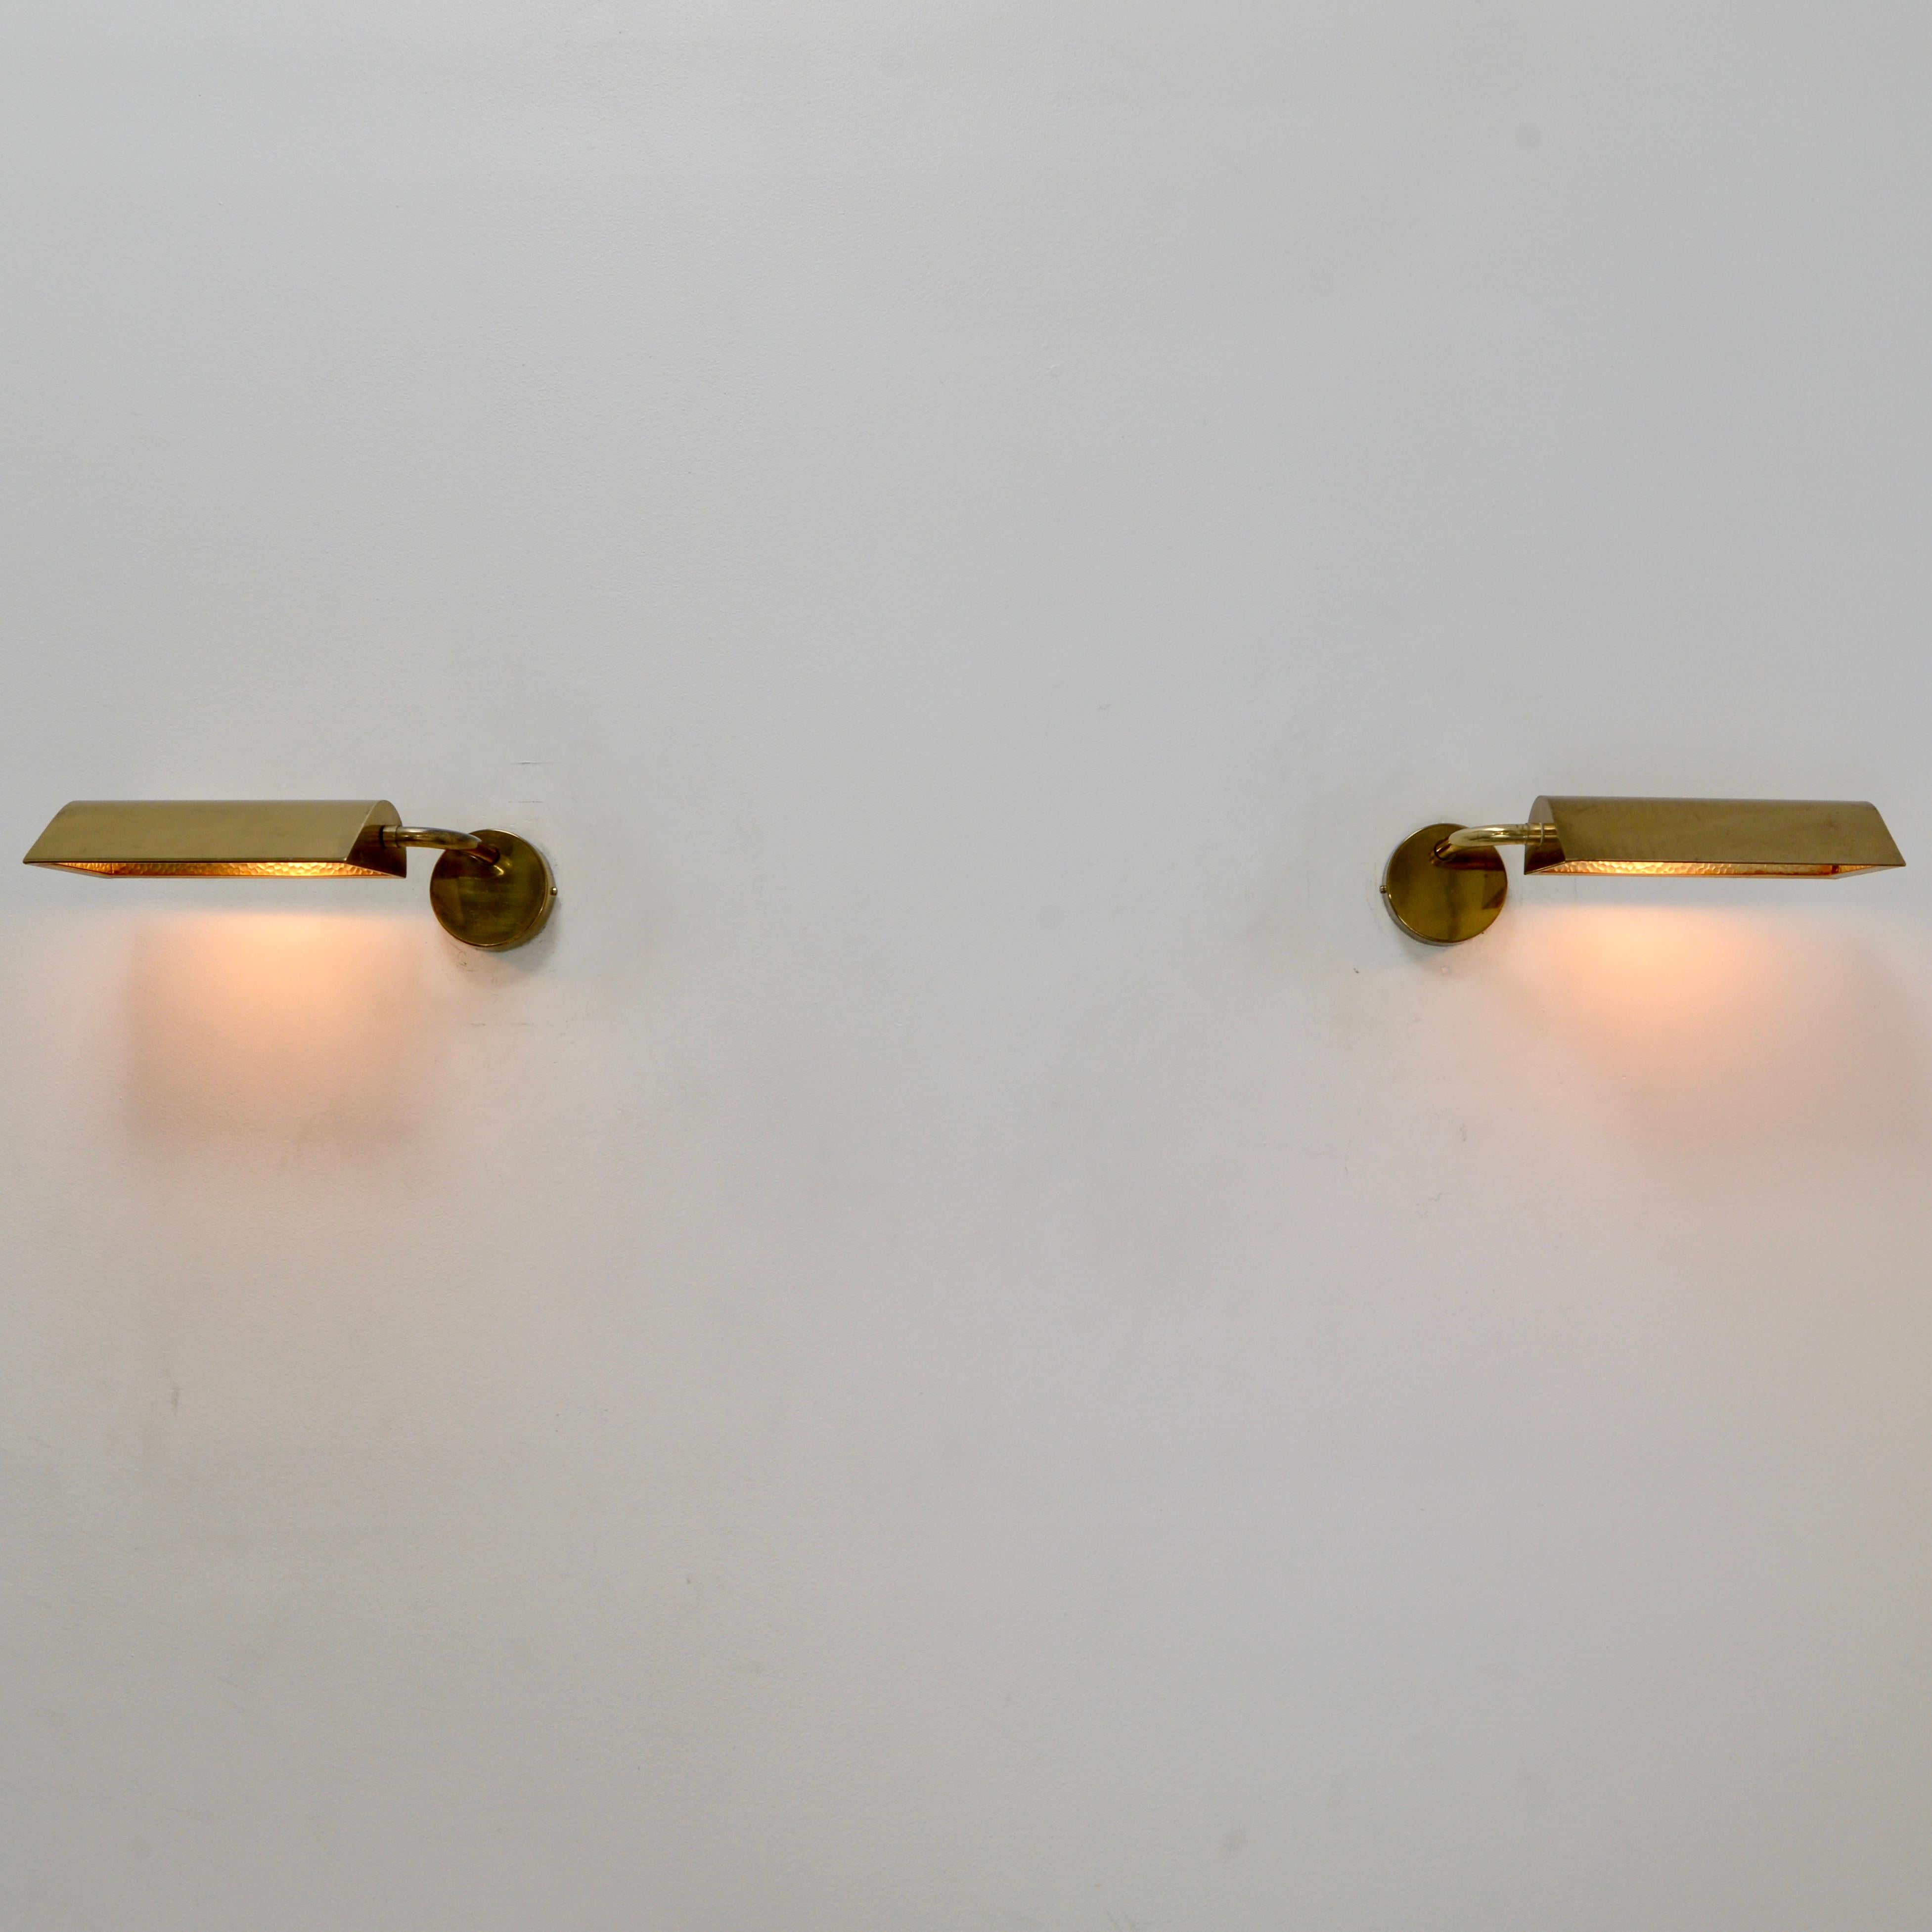 Pair of all brass Directional Italian sconces with original finish from the 1950s. Partially restored. (1) E26 medium based socket per sconce with tubular light bulb. Wired for use in the US. Lightbulbs included with order. Sold as a